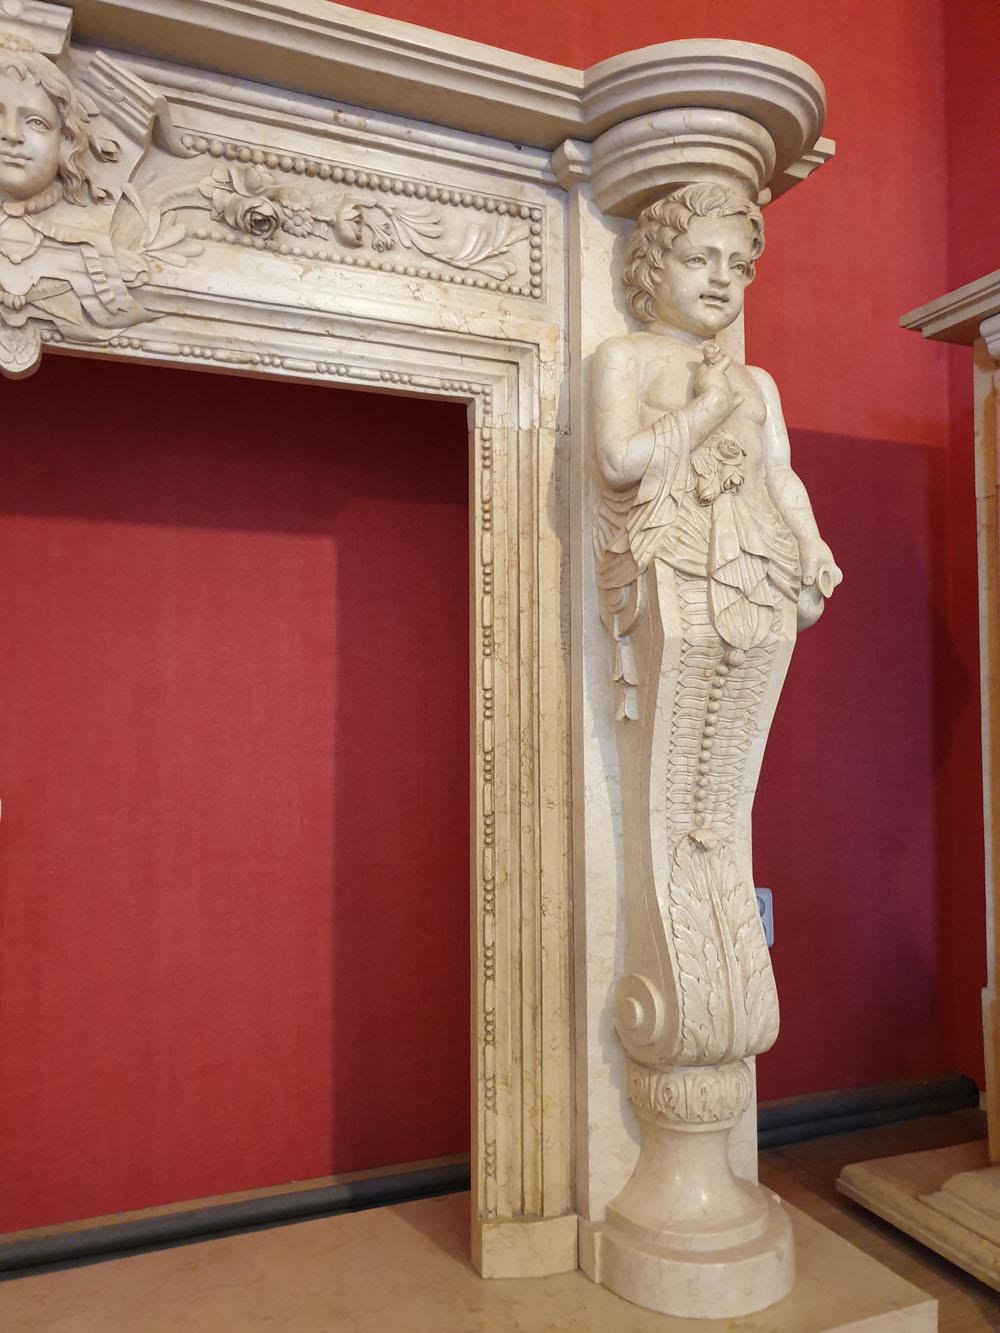 Marble Fireplace Portal in Style of Baroque 1